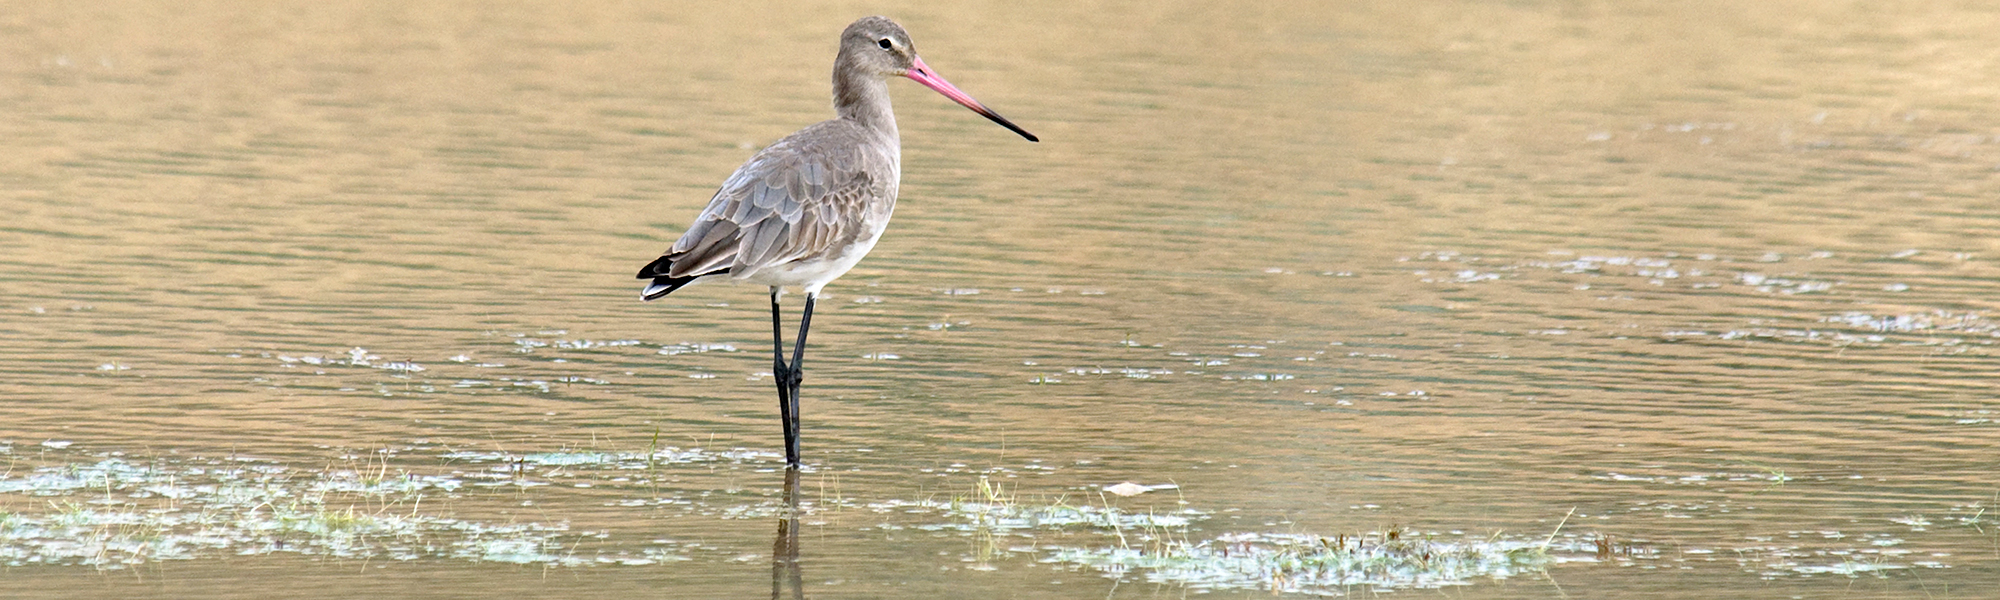 Black-tailed godwit in the paddy field